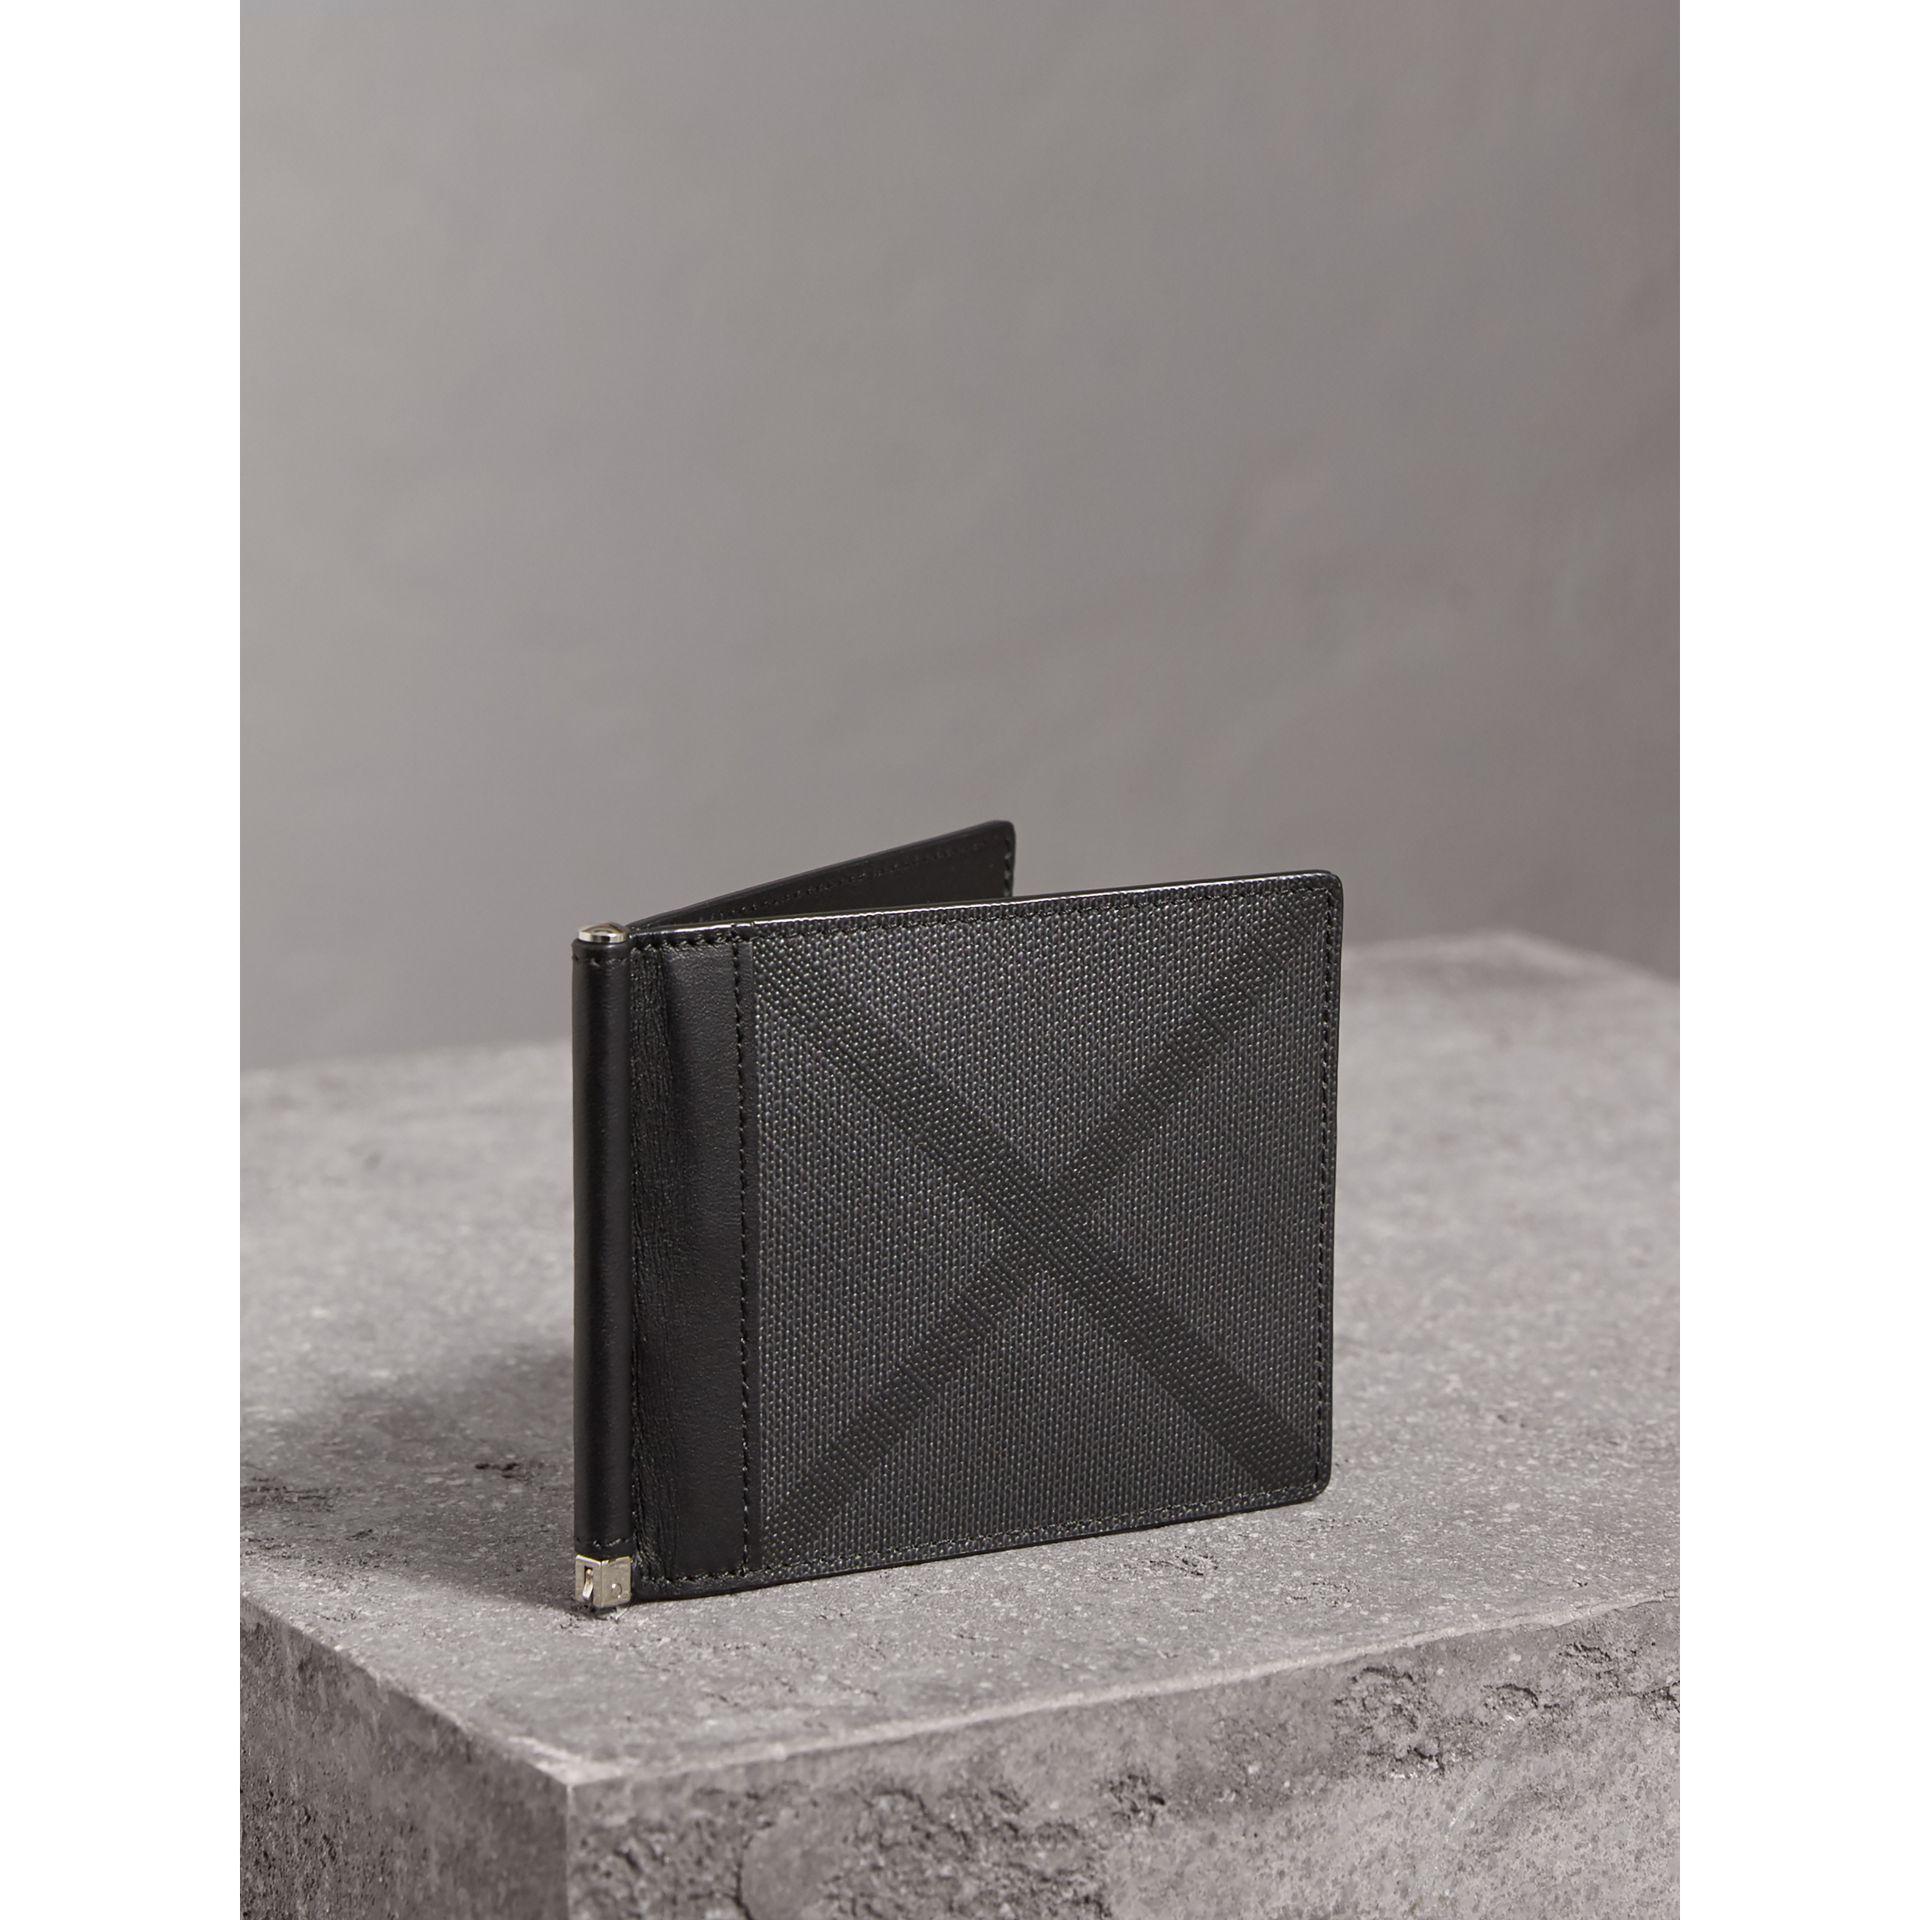 Burberry London Check Money Wallet in Charcoal/Black (Gray) for Men - Lyst